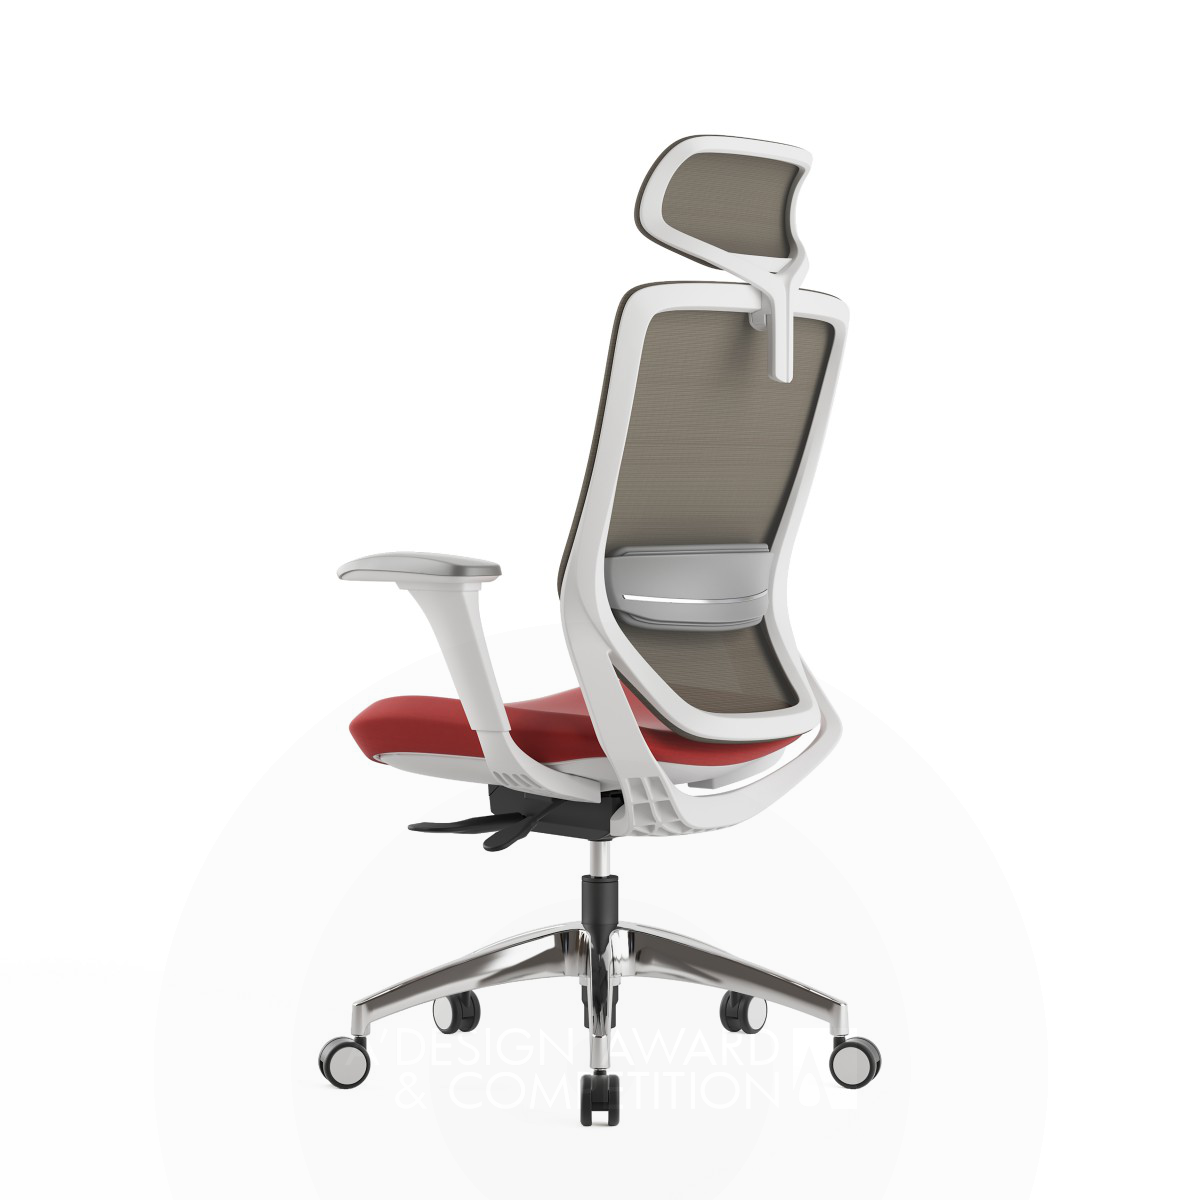 KOHO R&D Team wins Bronze at the prestigious A' Office Furniture Design Award with Swift Office Chair.